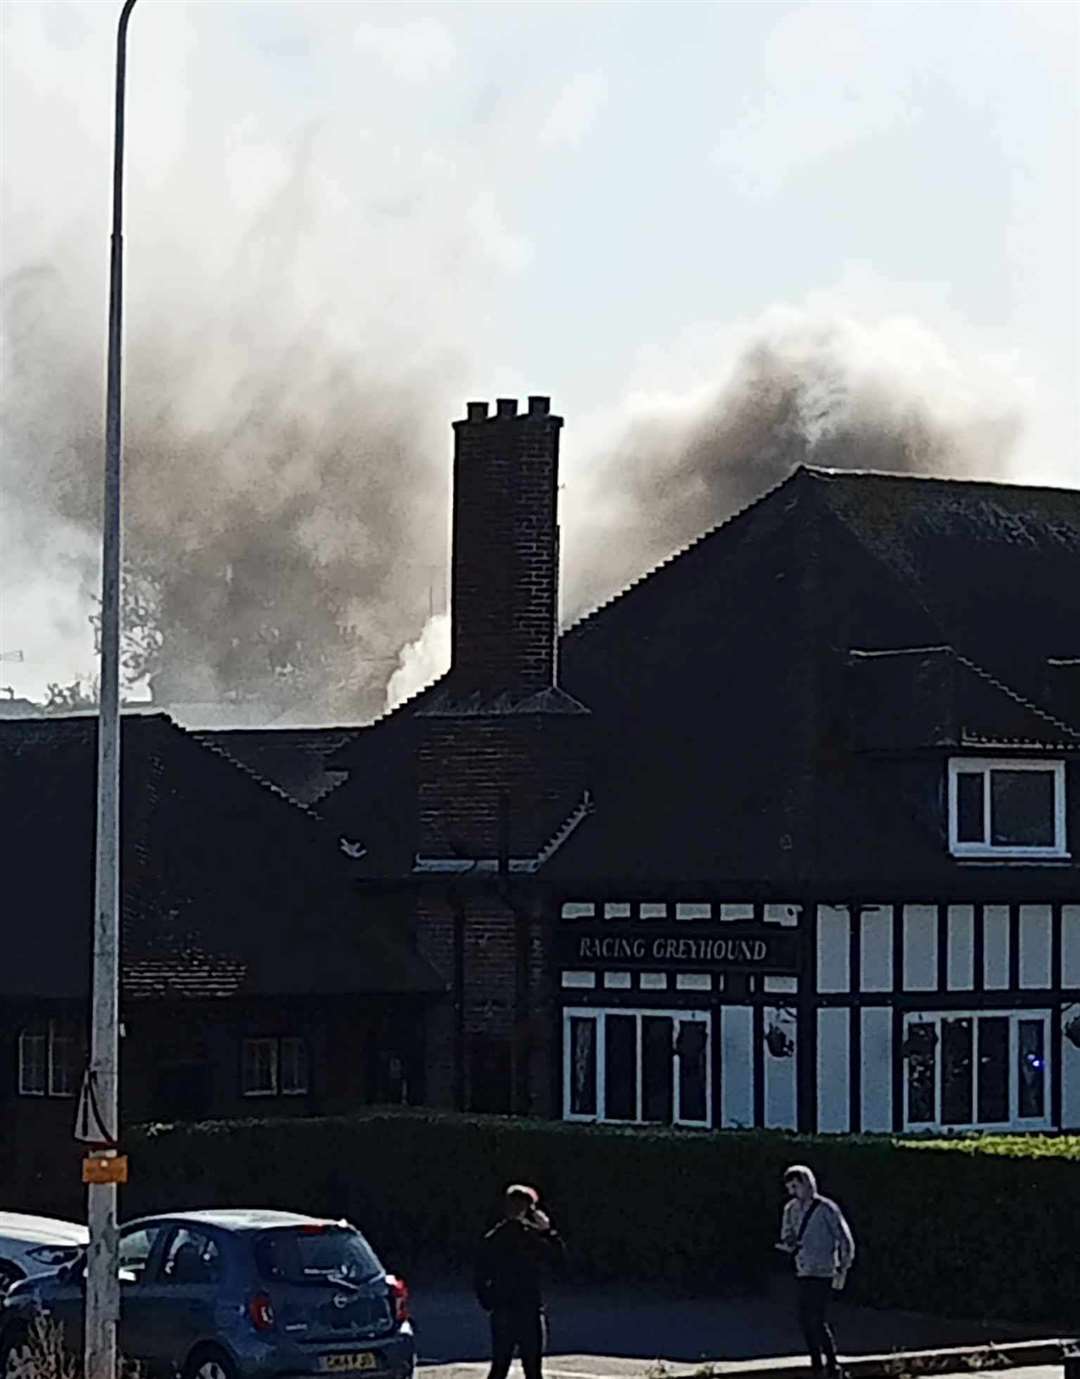 The fire at The Racing Greyhound pub in Ramsgate